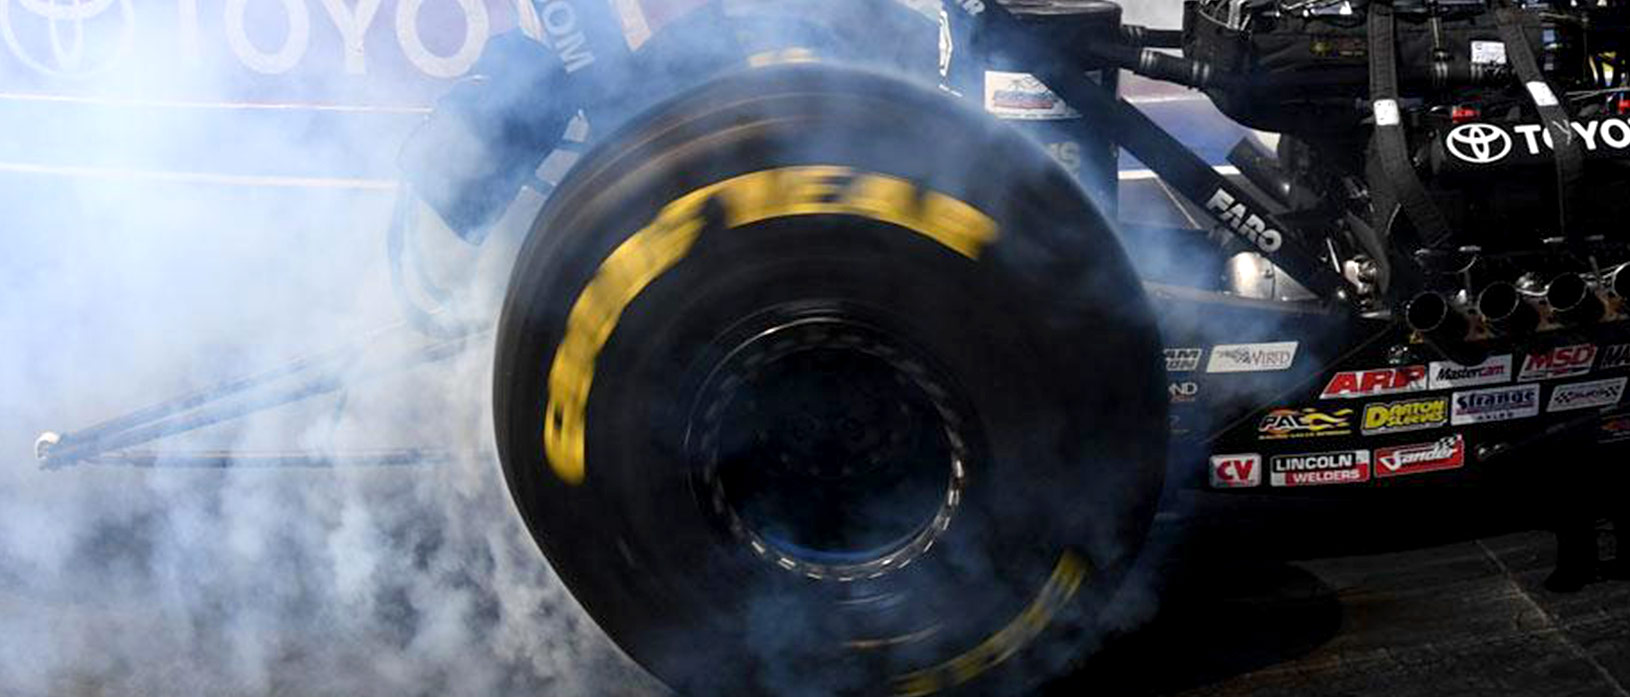 Top Fuel Dragster tire spinning with smoke coming out